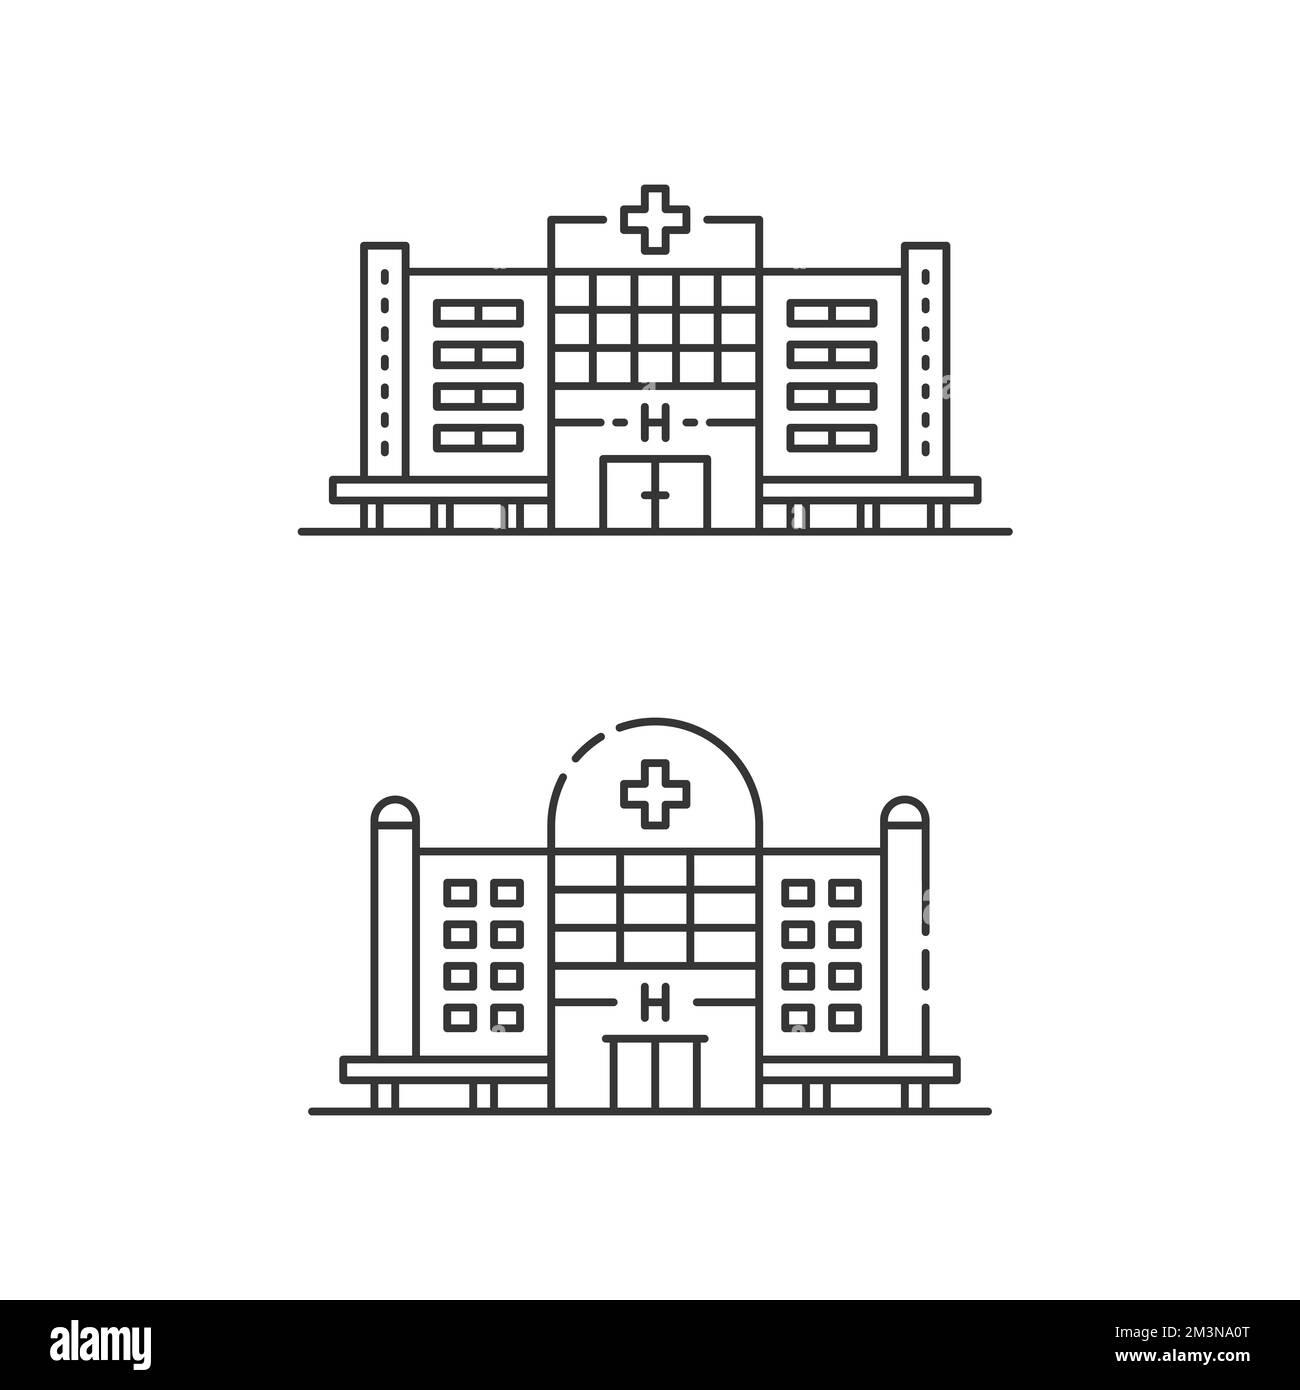 Hospital icons. Set of medicine buildings. Medical center signs concept in flat line style. Private clinic symbols. Vector modern illustration Stock Vector